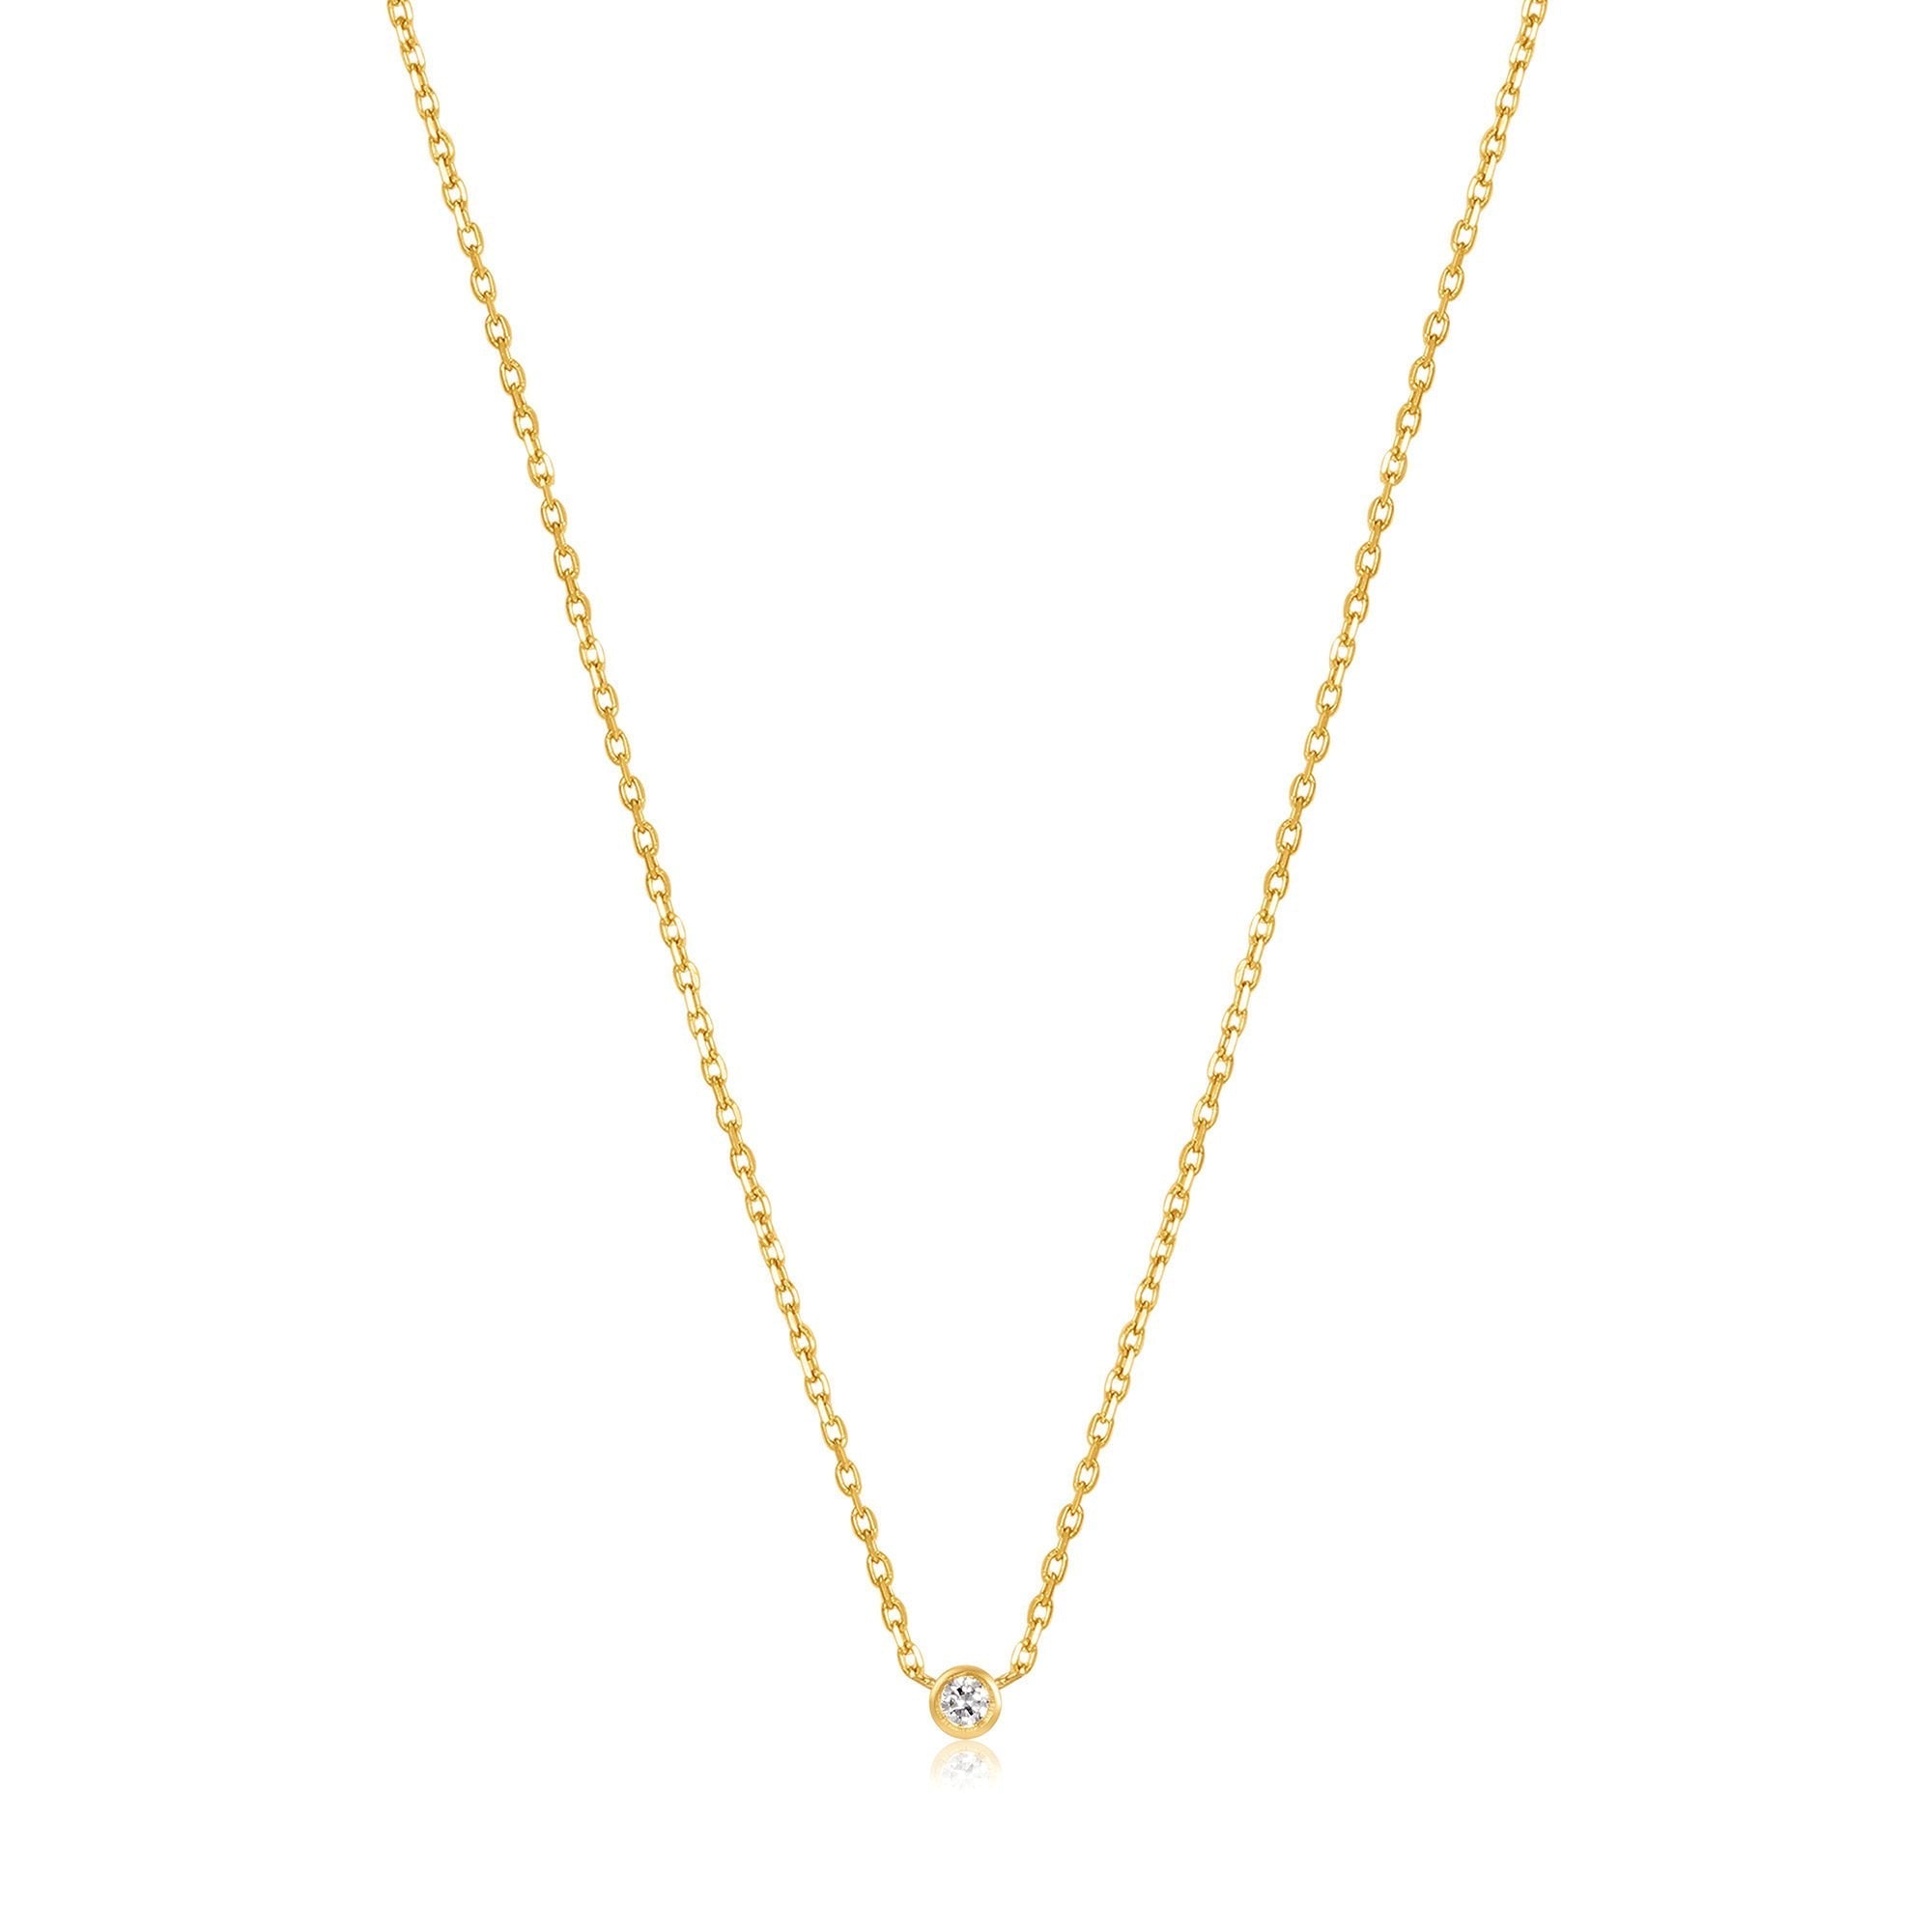 Ania Haie 14ct Gold Single Natural Diamond Necklace